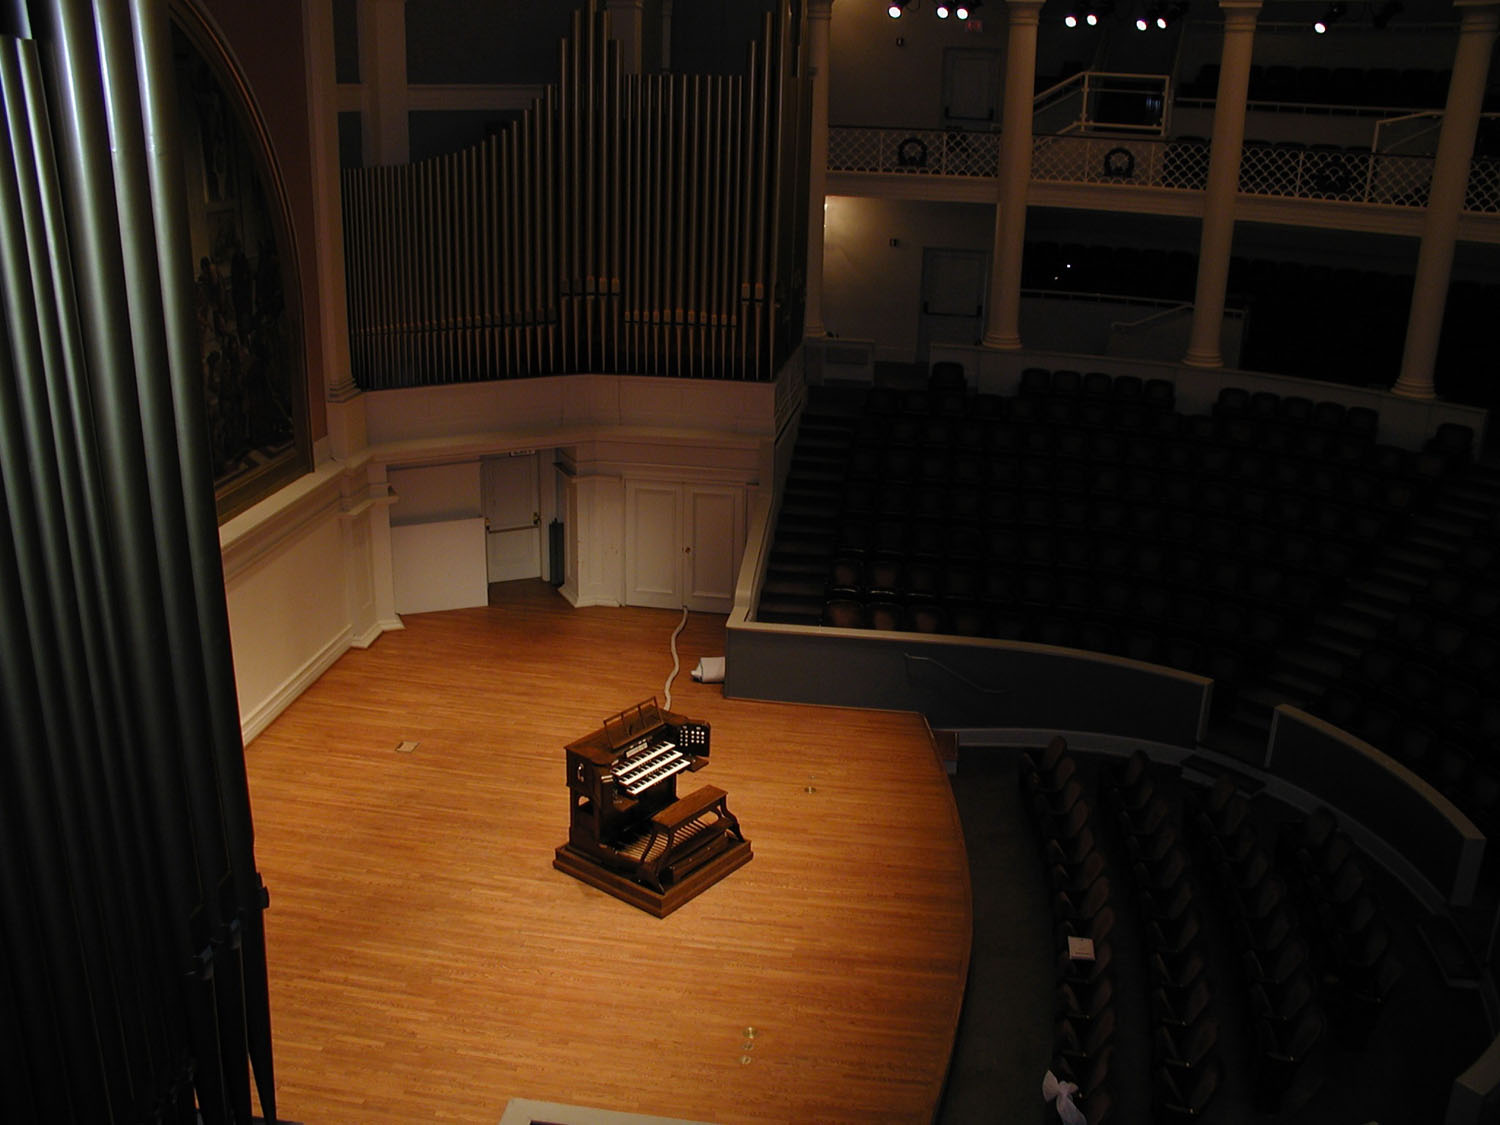 Organ on a stage